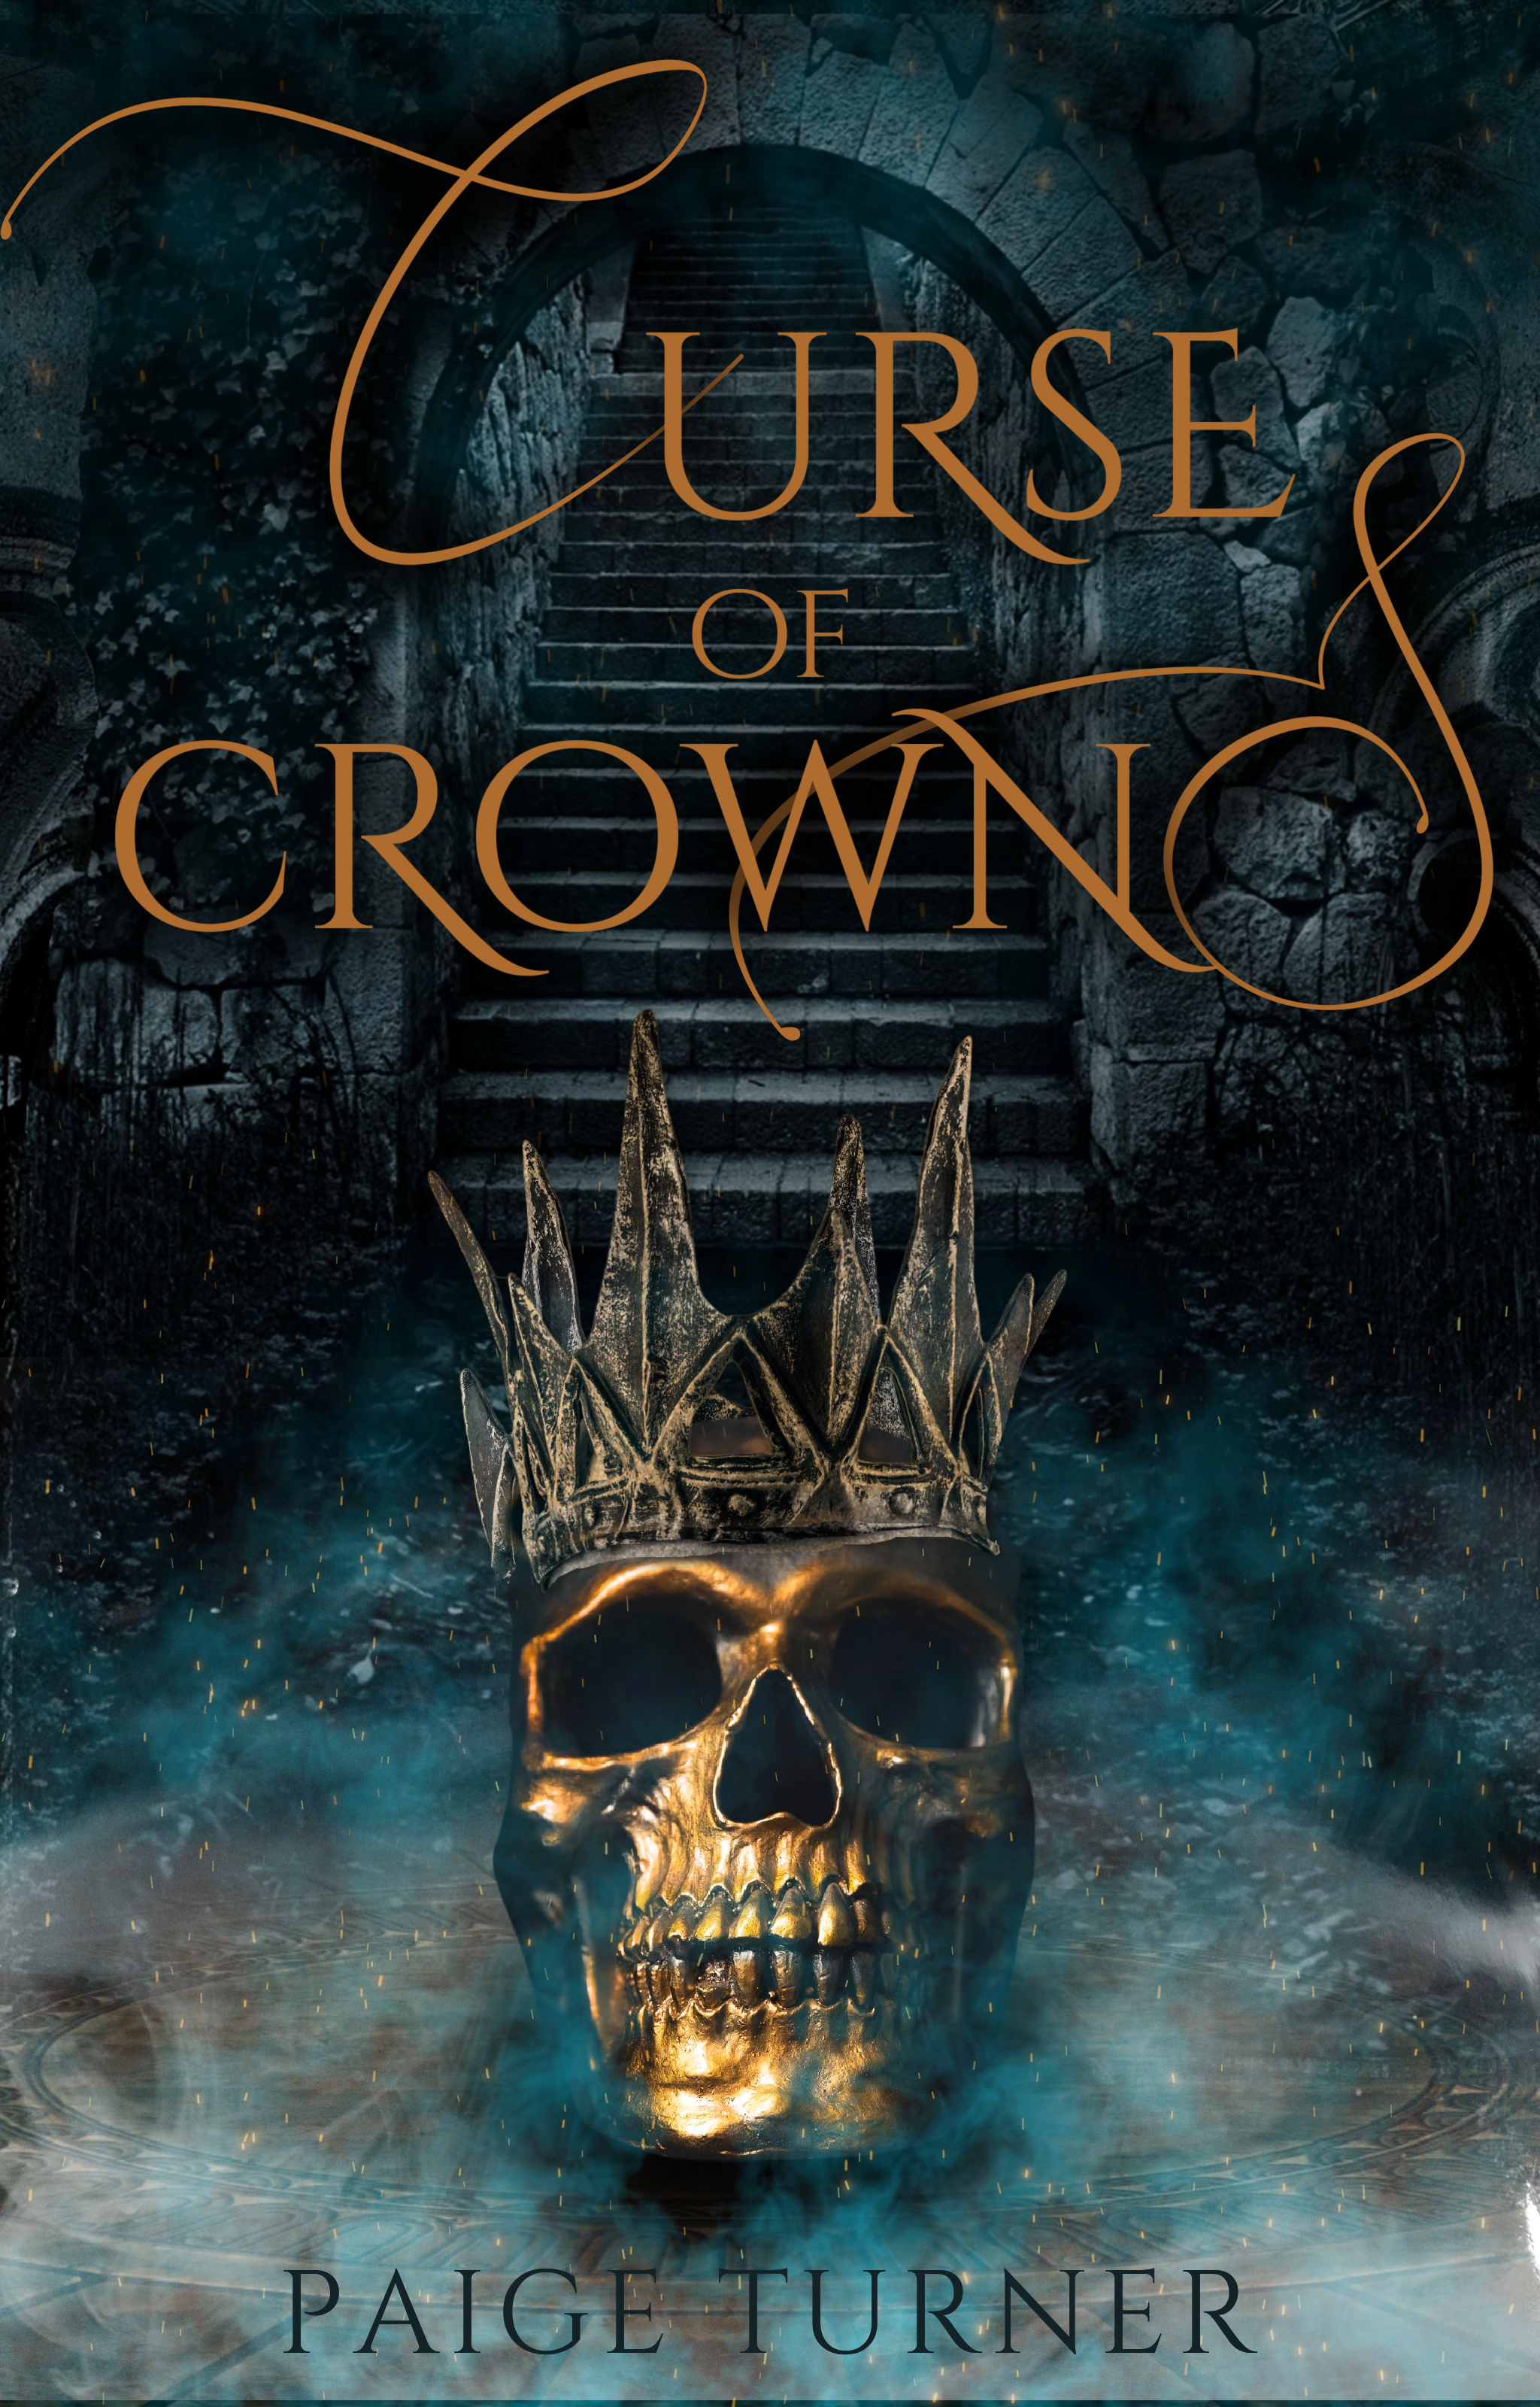 58-curse-of-crowns-cover.jpg